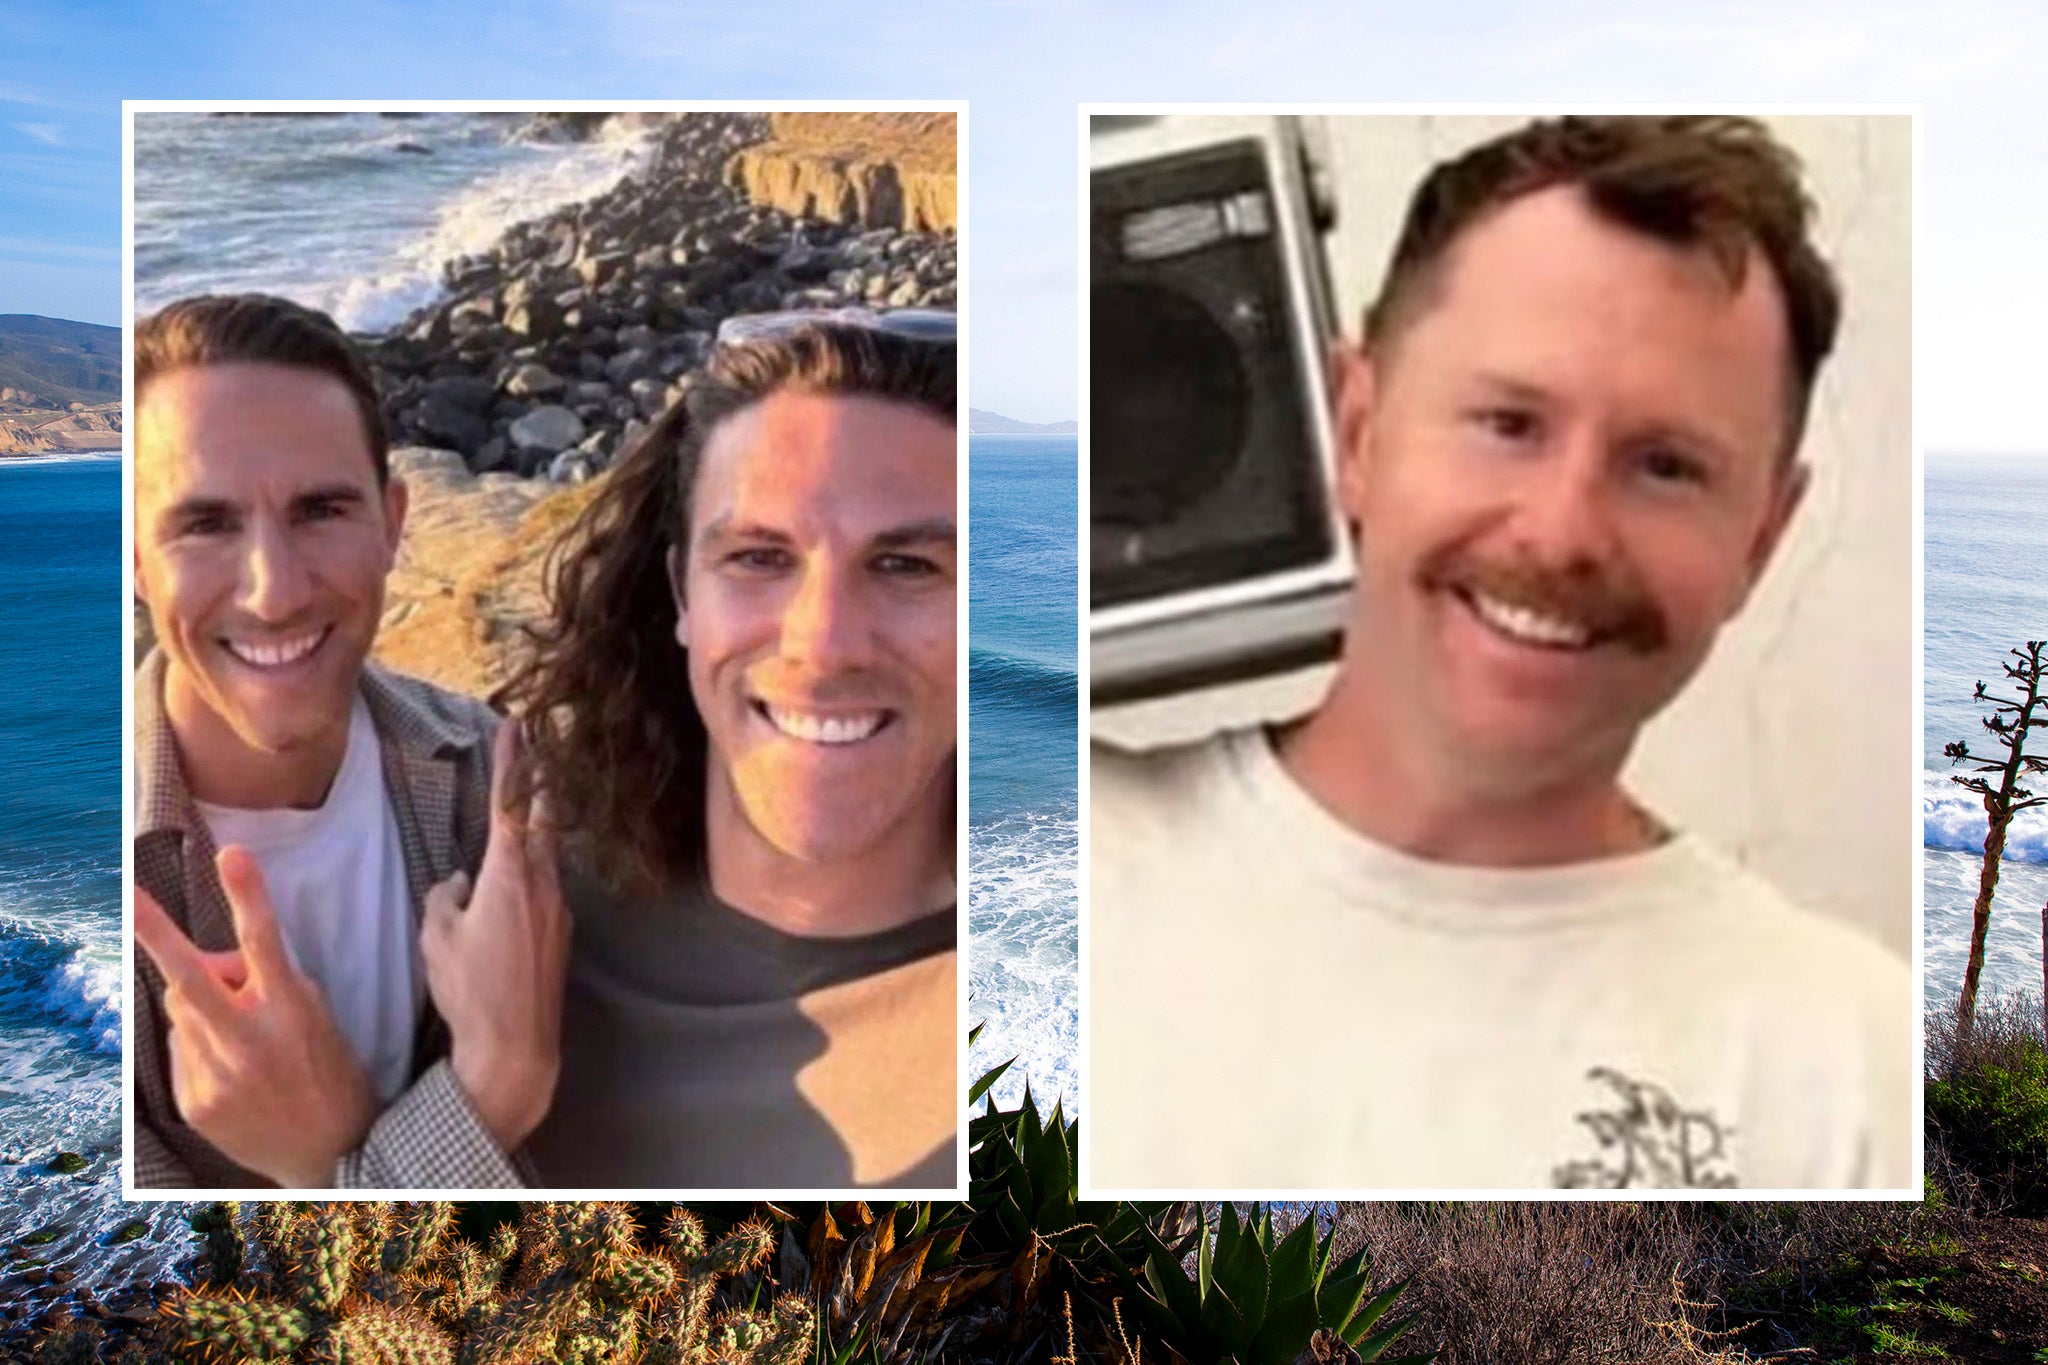 ‎Australian brothers Jake Robinson, Callum Robinson, and their American friend Carter Rhoad, were shot and killed in Mexico during a surfing trip